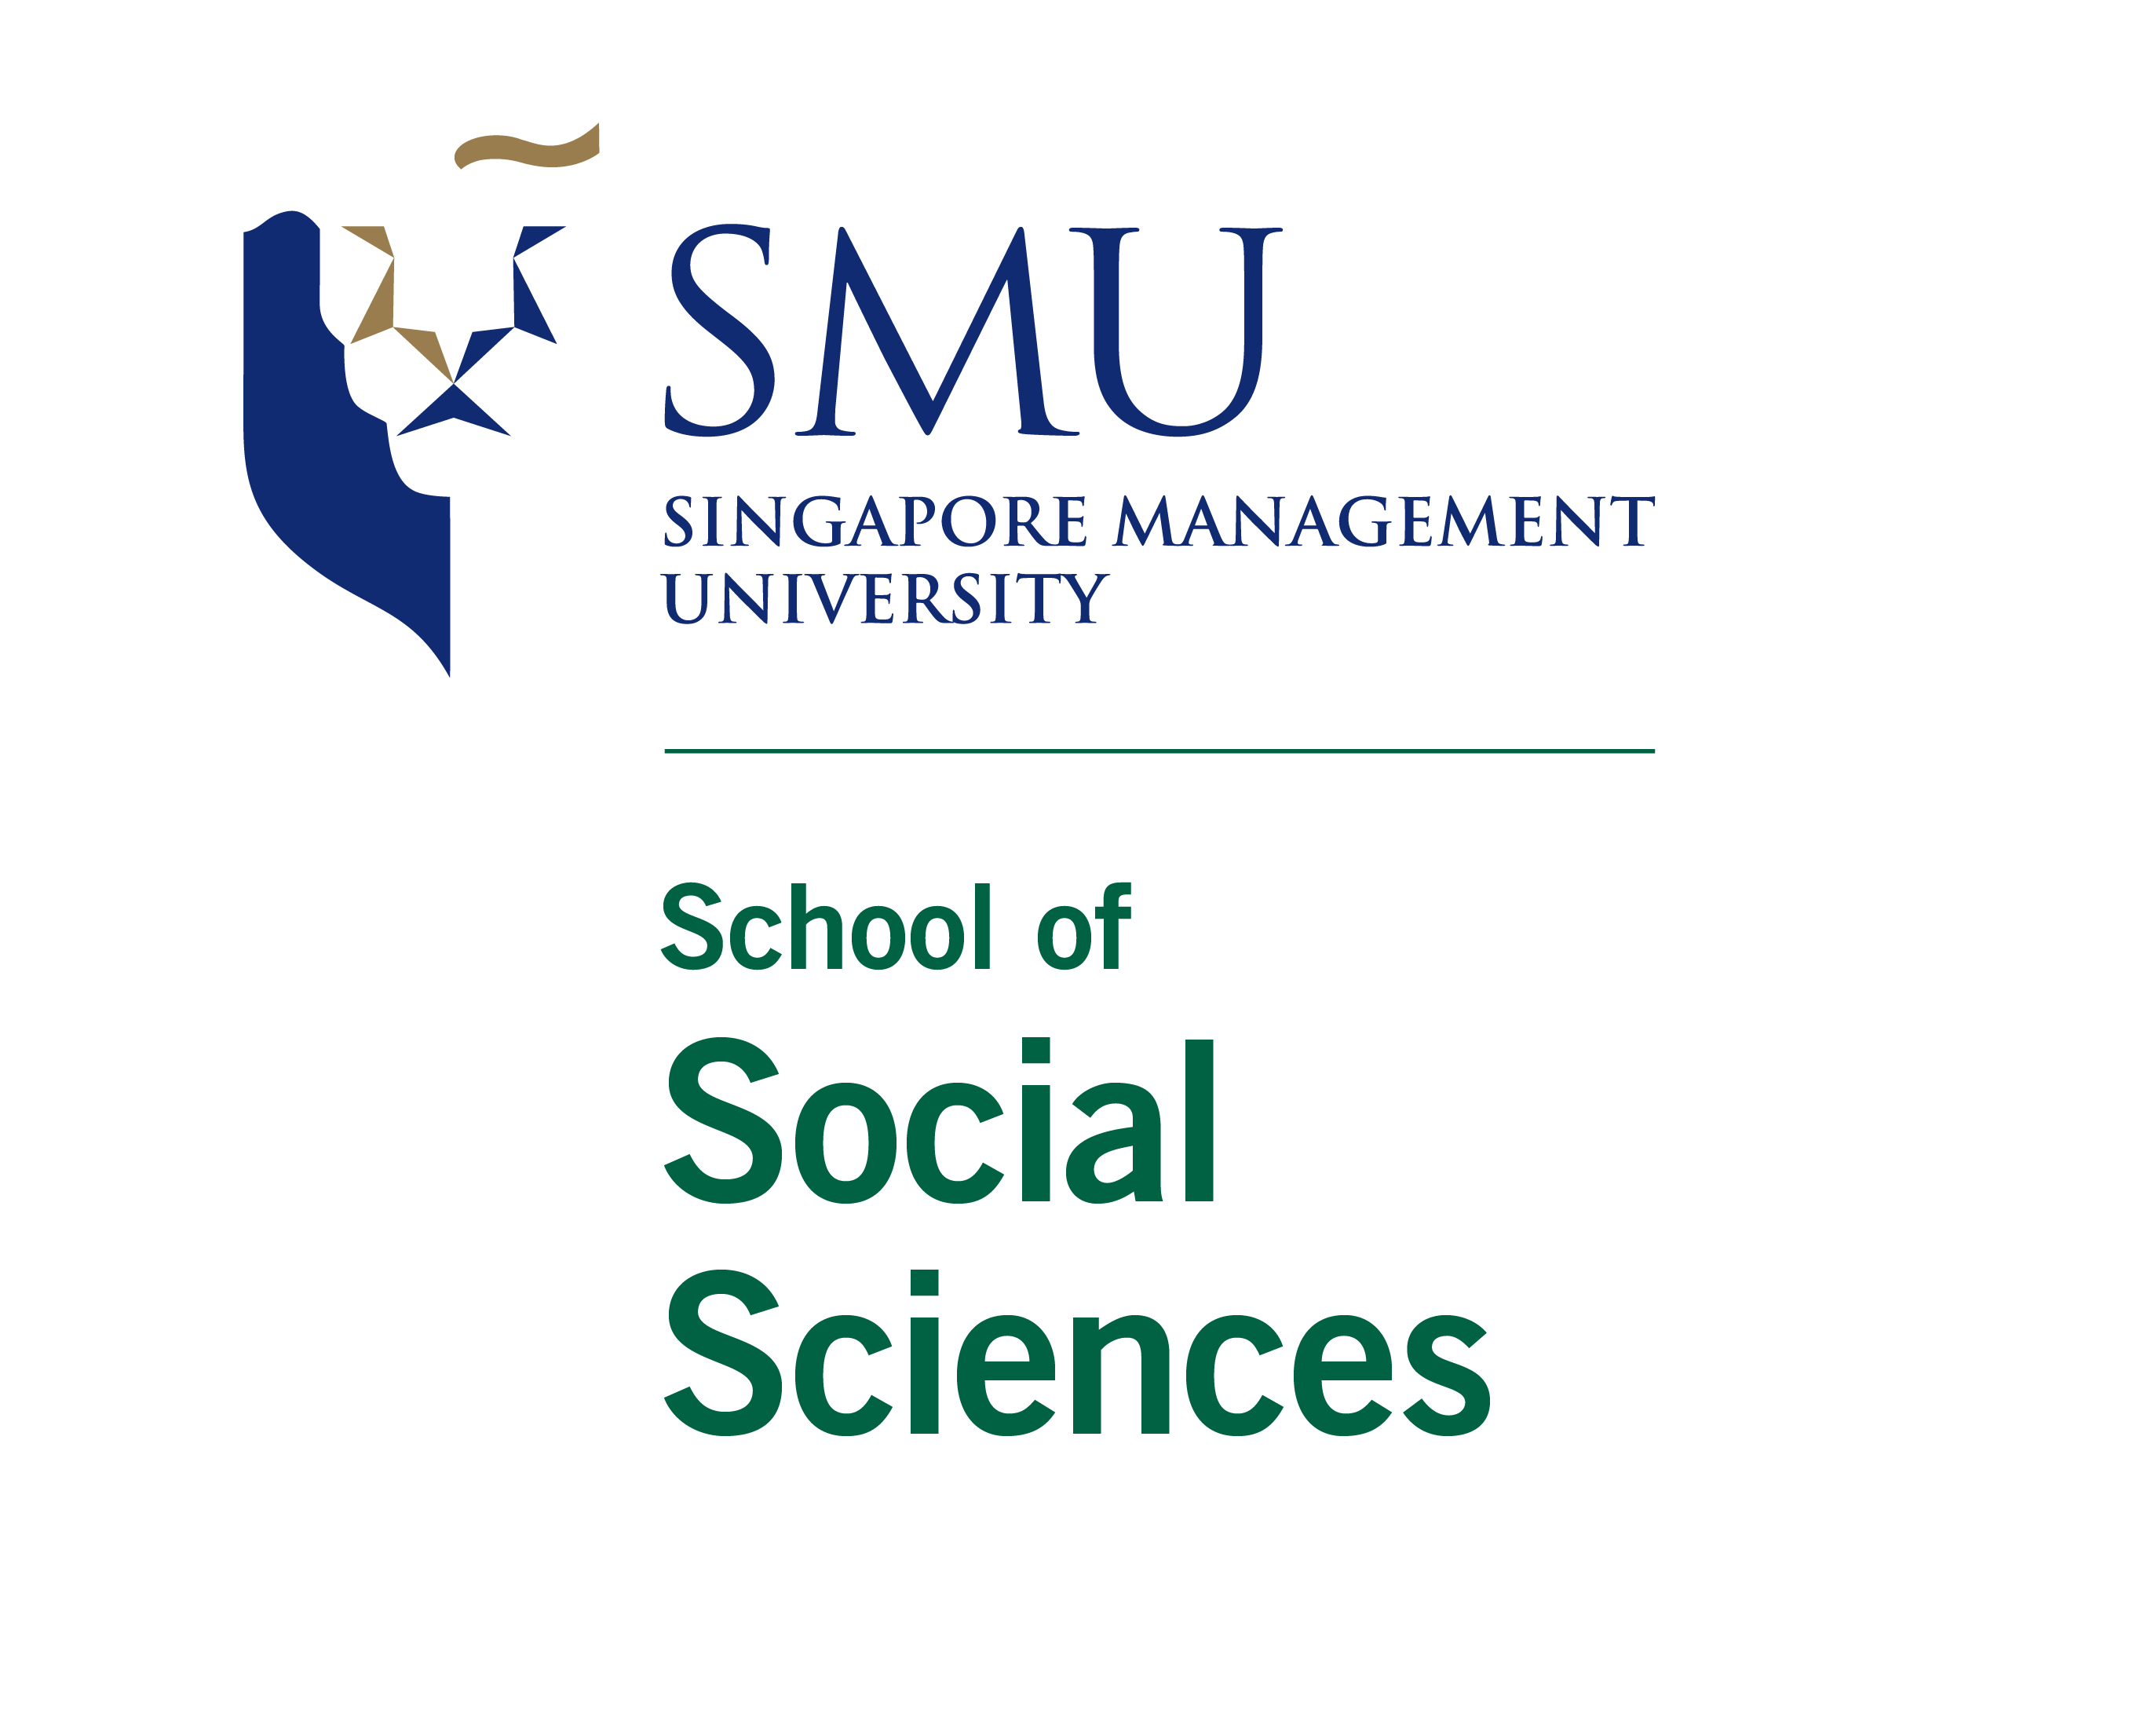 School of Social Sciences Most Popular Papers (May-Jul 2020)